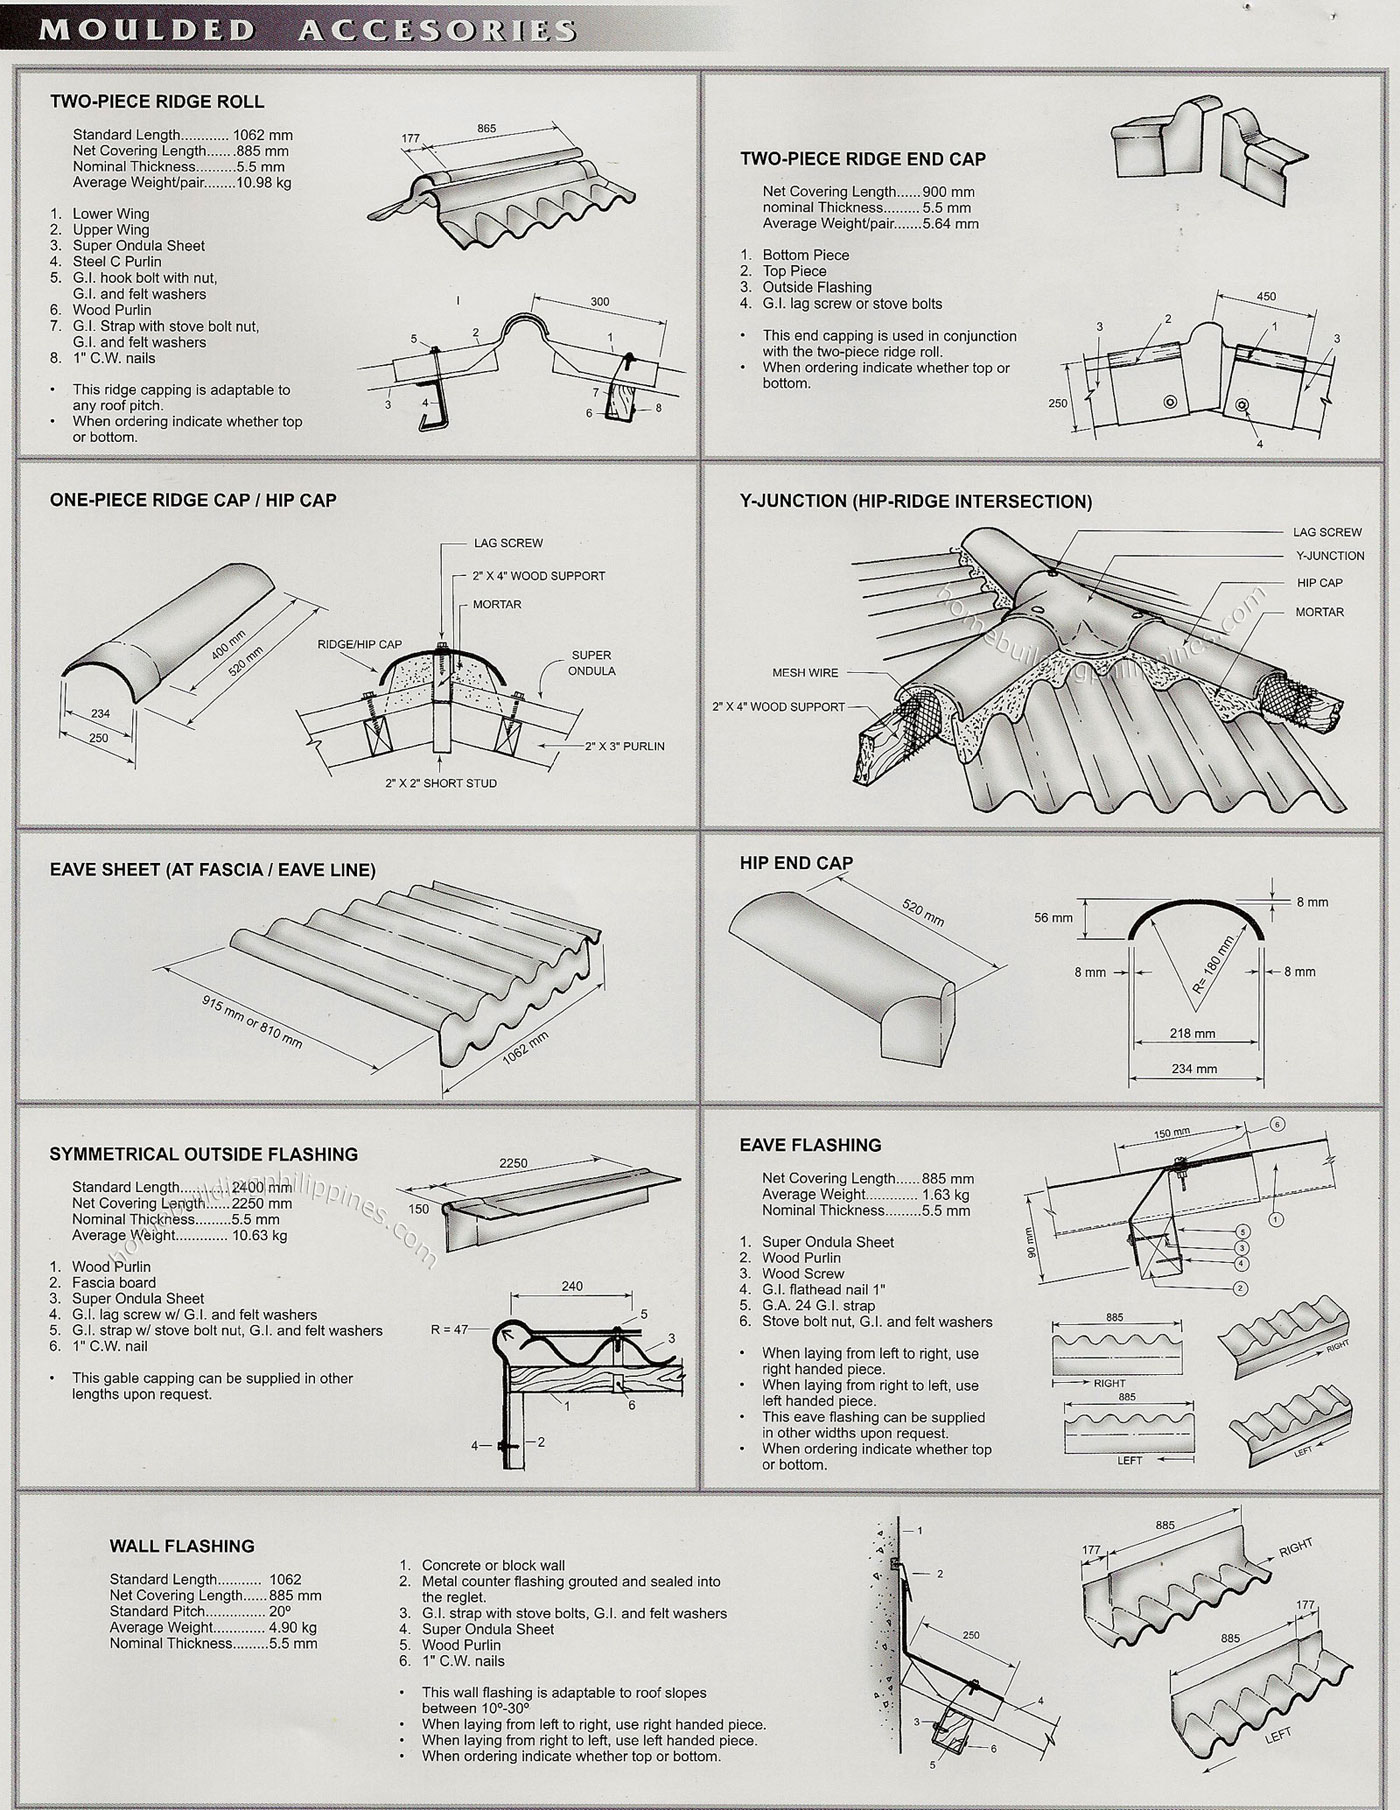 Super Ondula Roofing Tile Moulded Accessories